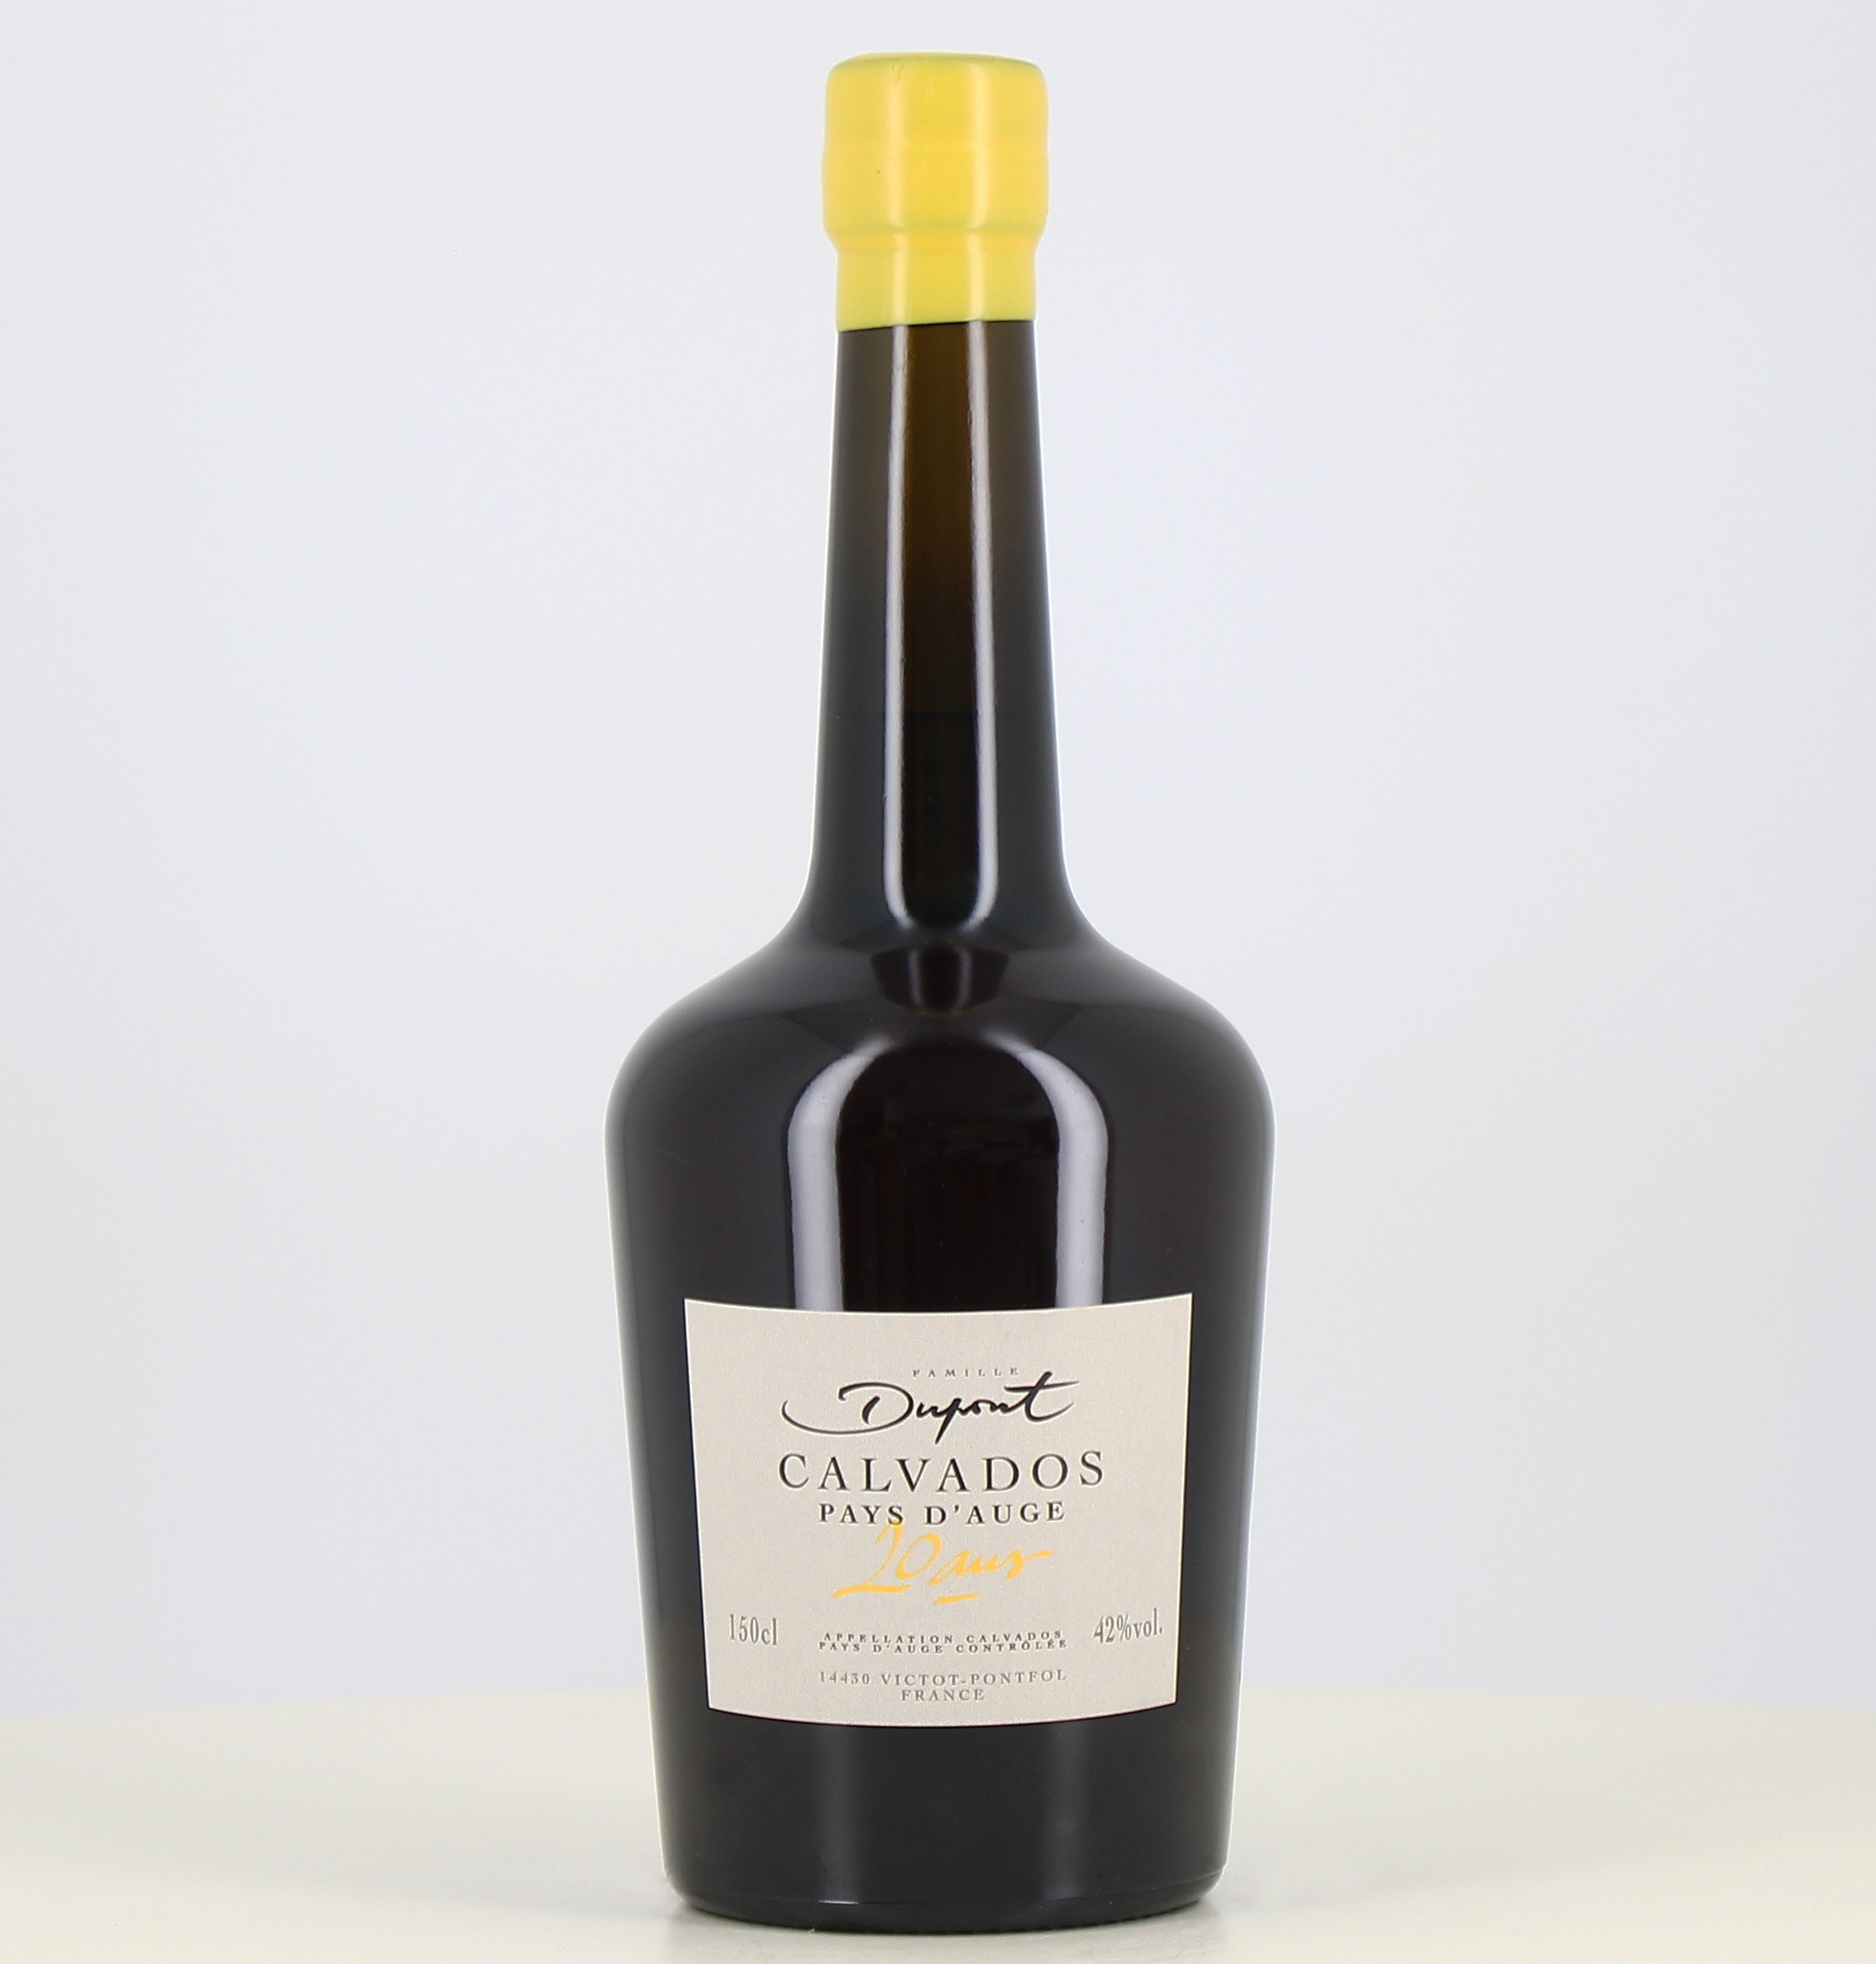 Magnum calvados Pays d'Auge Dupont 20 ans 42°

This translates to:
Magnum calvados Pays d'Auge Dupont 20 years old 42° 